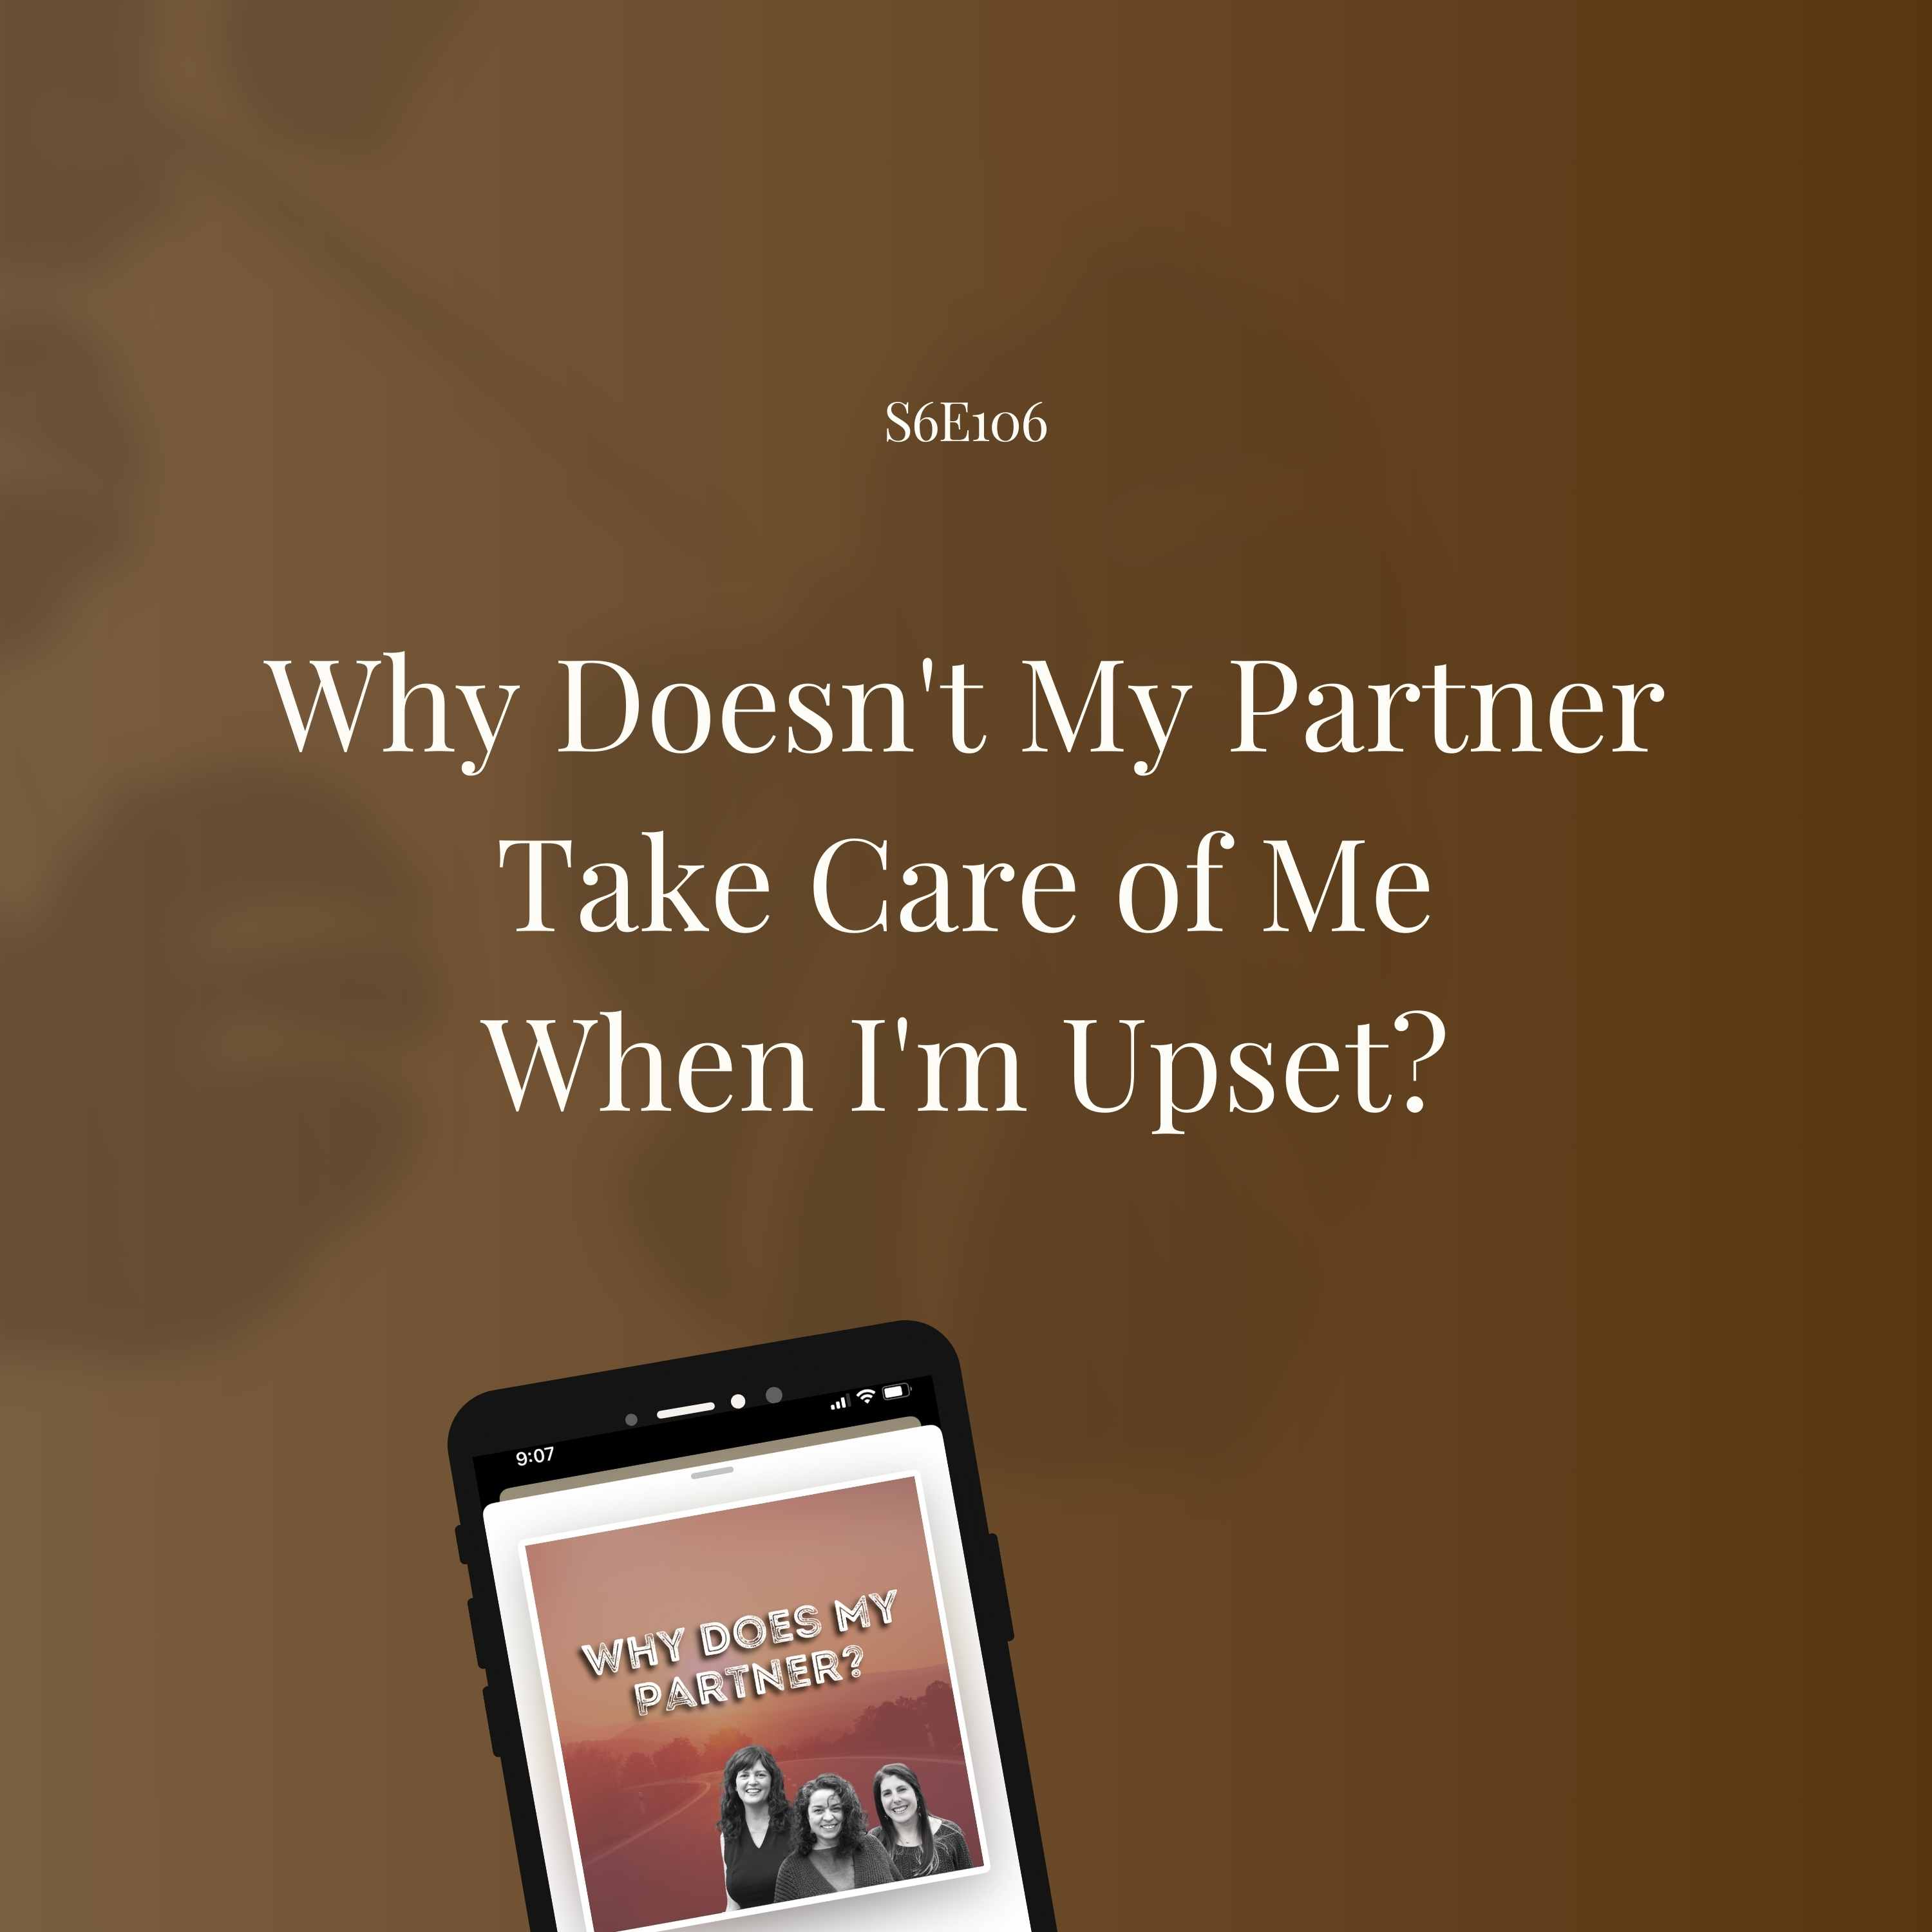 Why Doesn't My Partner Take Care of Me When I'm Upset?